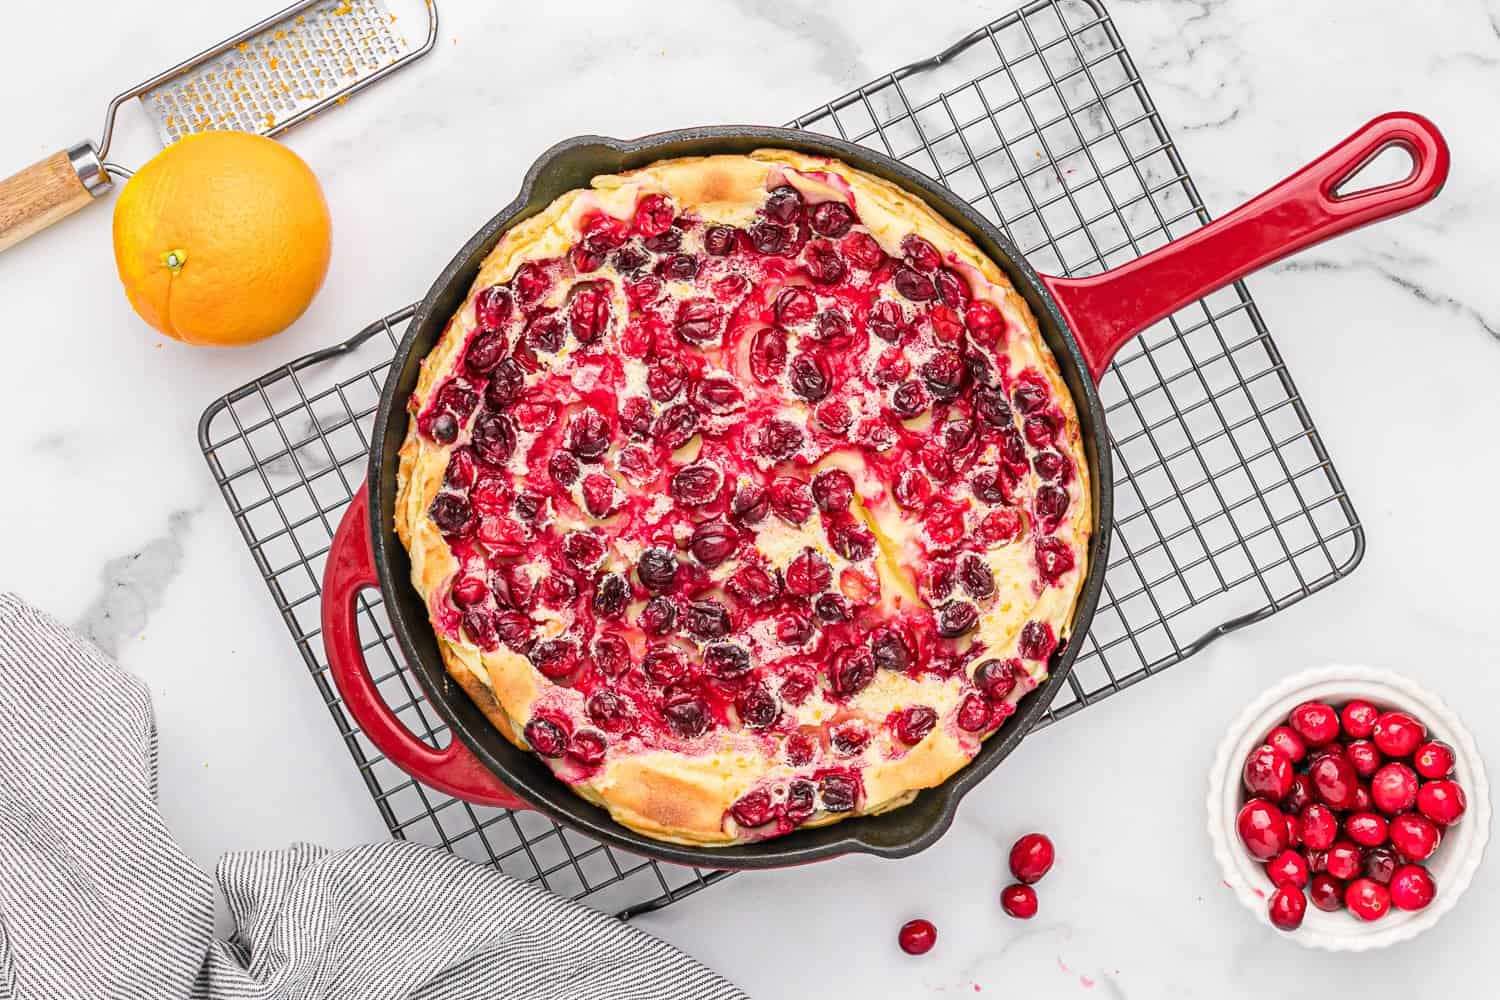 Baked clafoutis with cranberries.